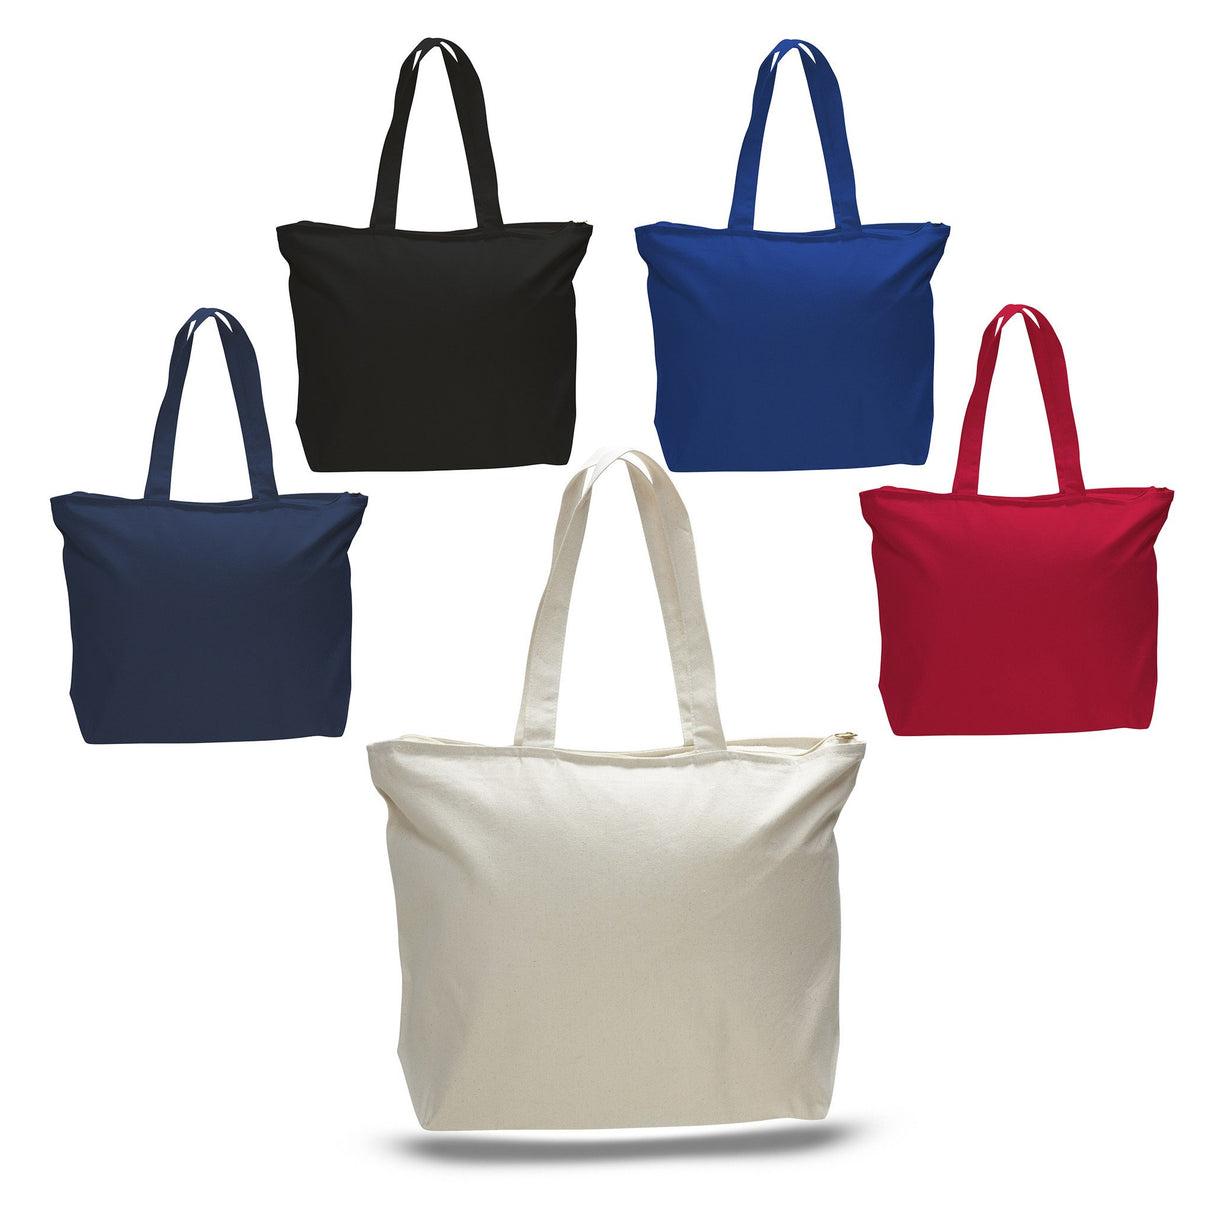 Heavy Canvas Tote bag with Zipper - Zippered Tote Bags